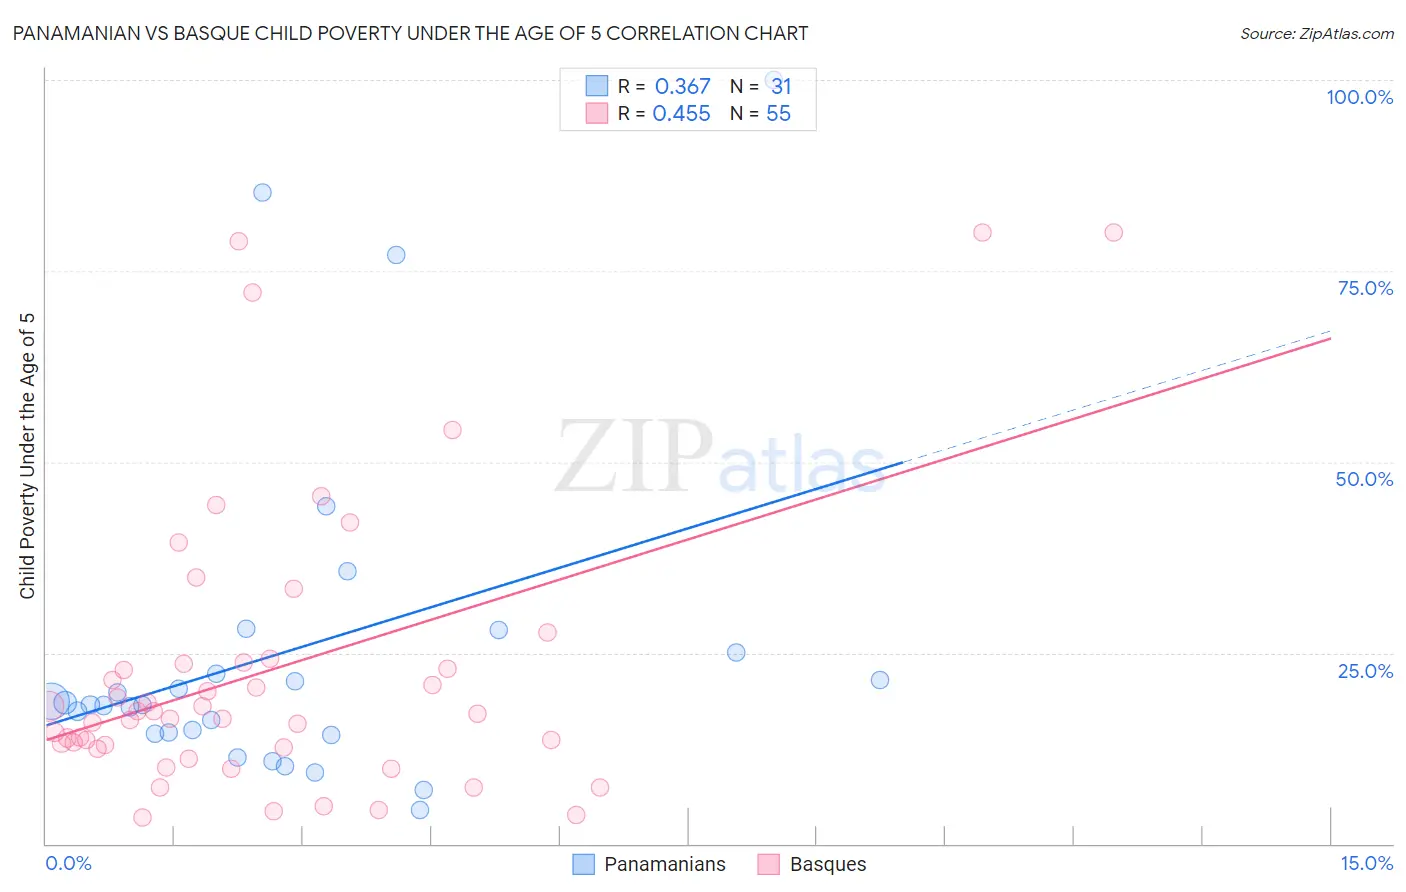 Panamanian vs Basque Child Poverty Under the Age of 5